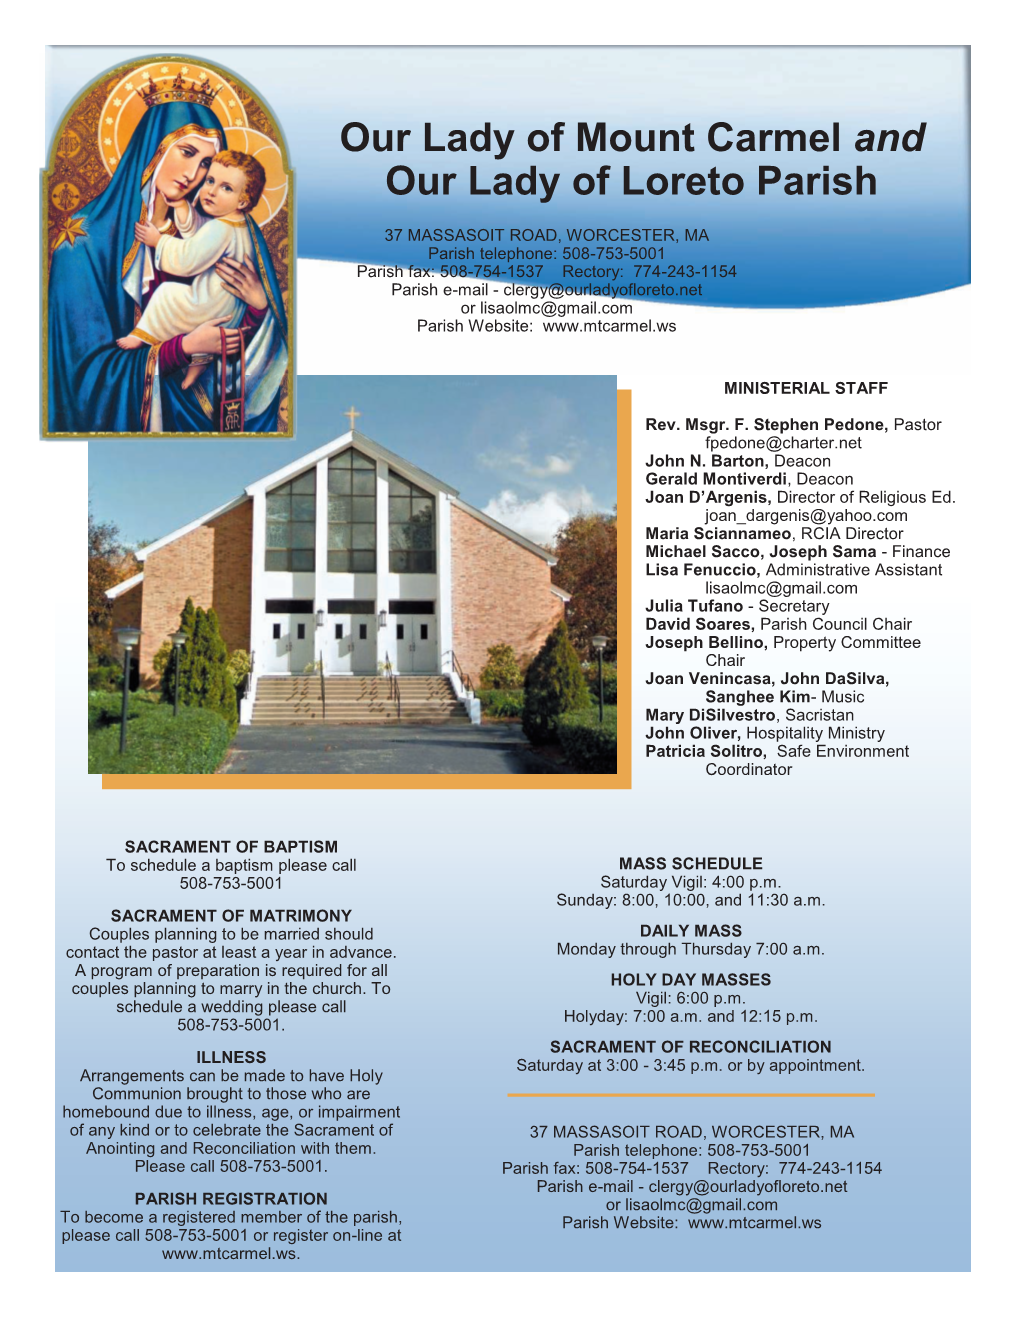 Our Lady of Mount Carmel and Our Lady of Loreto Parish